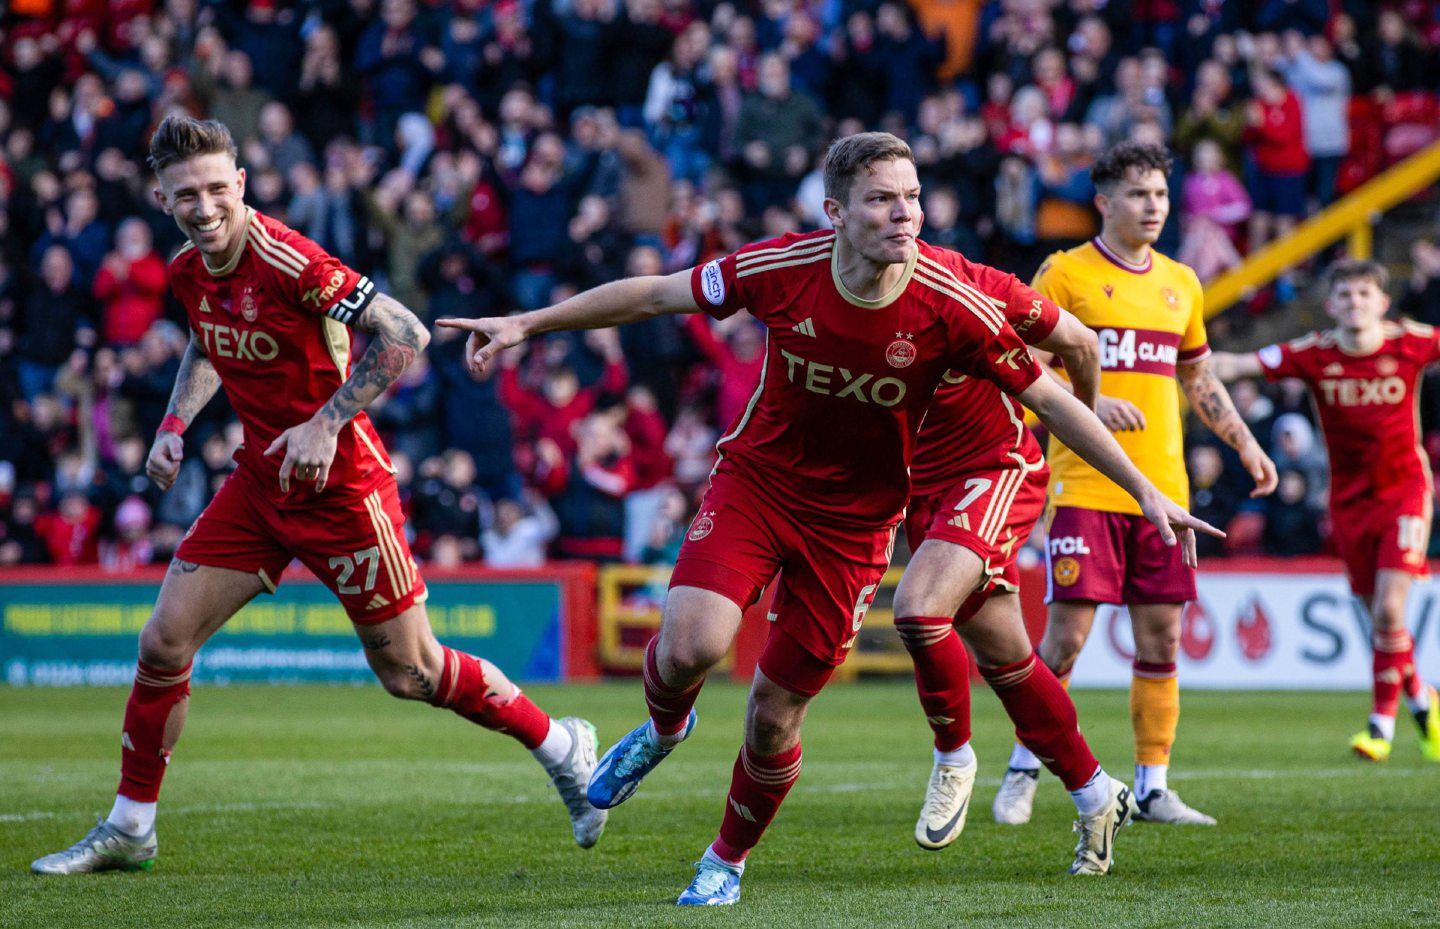  Aberdeen's Stefan Gartenmann celebrates as he scores to make it 1-0 against Motherwell at Pittodrie. Image: SNS 